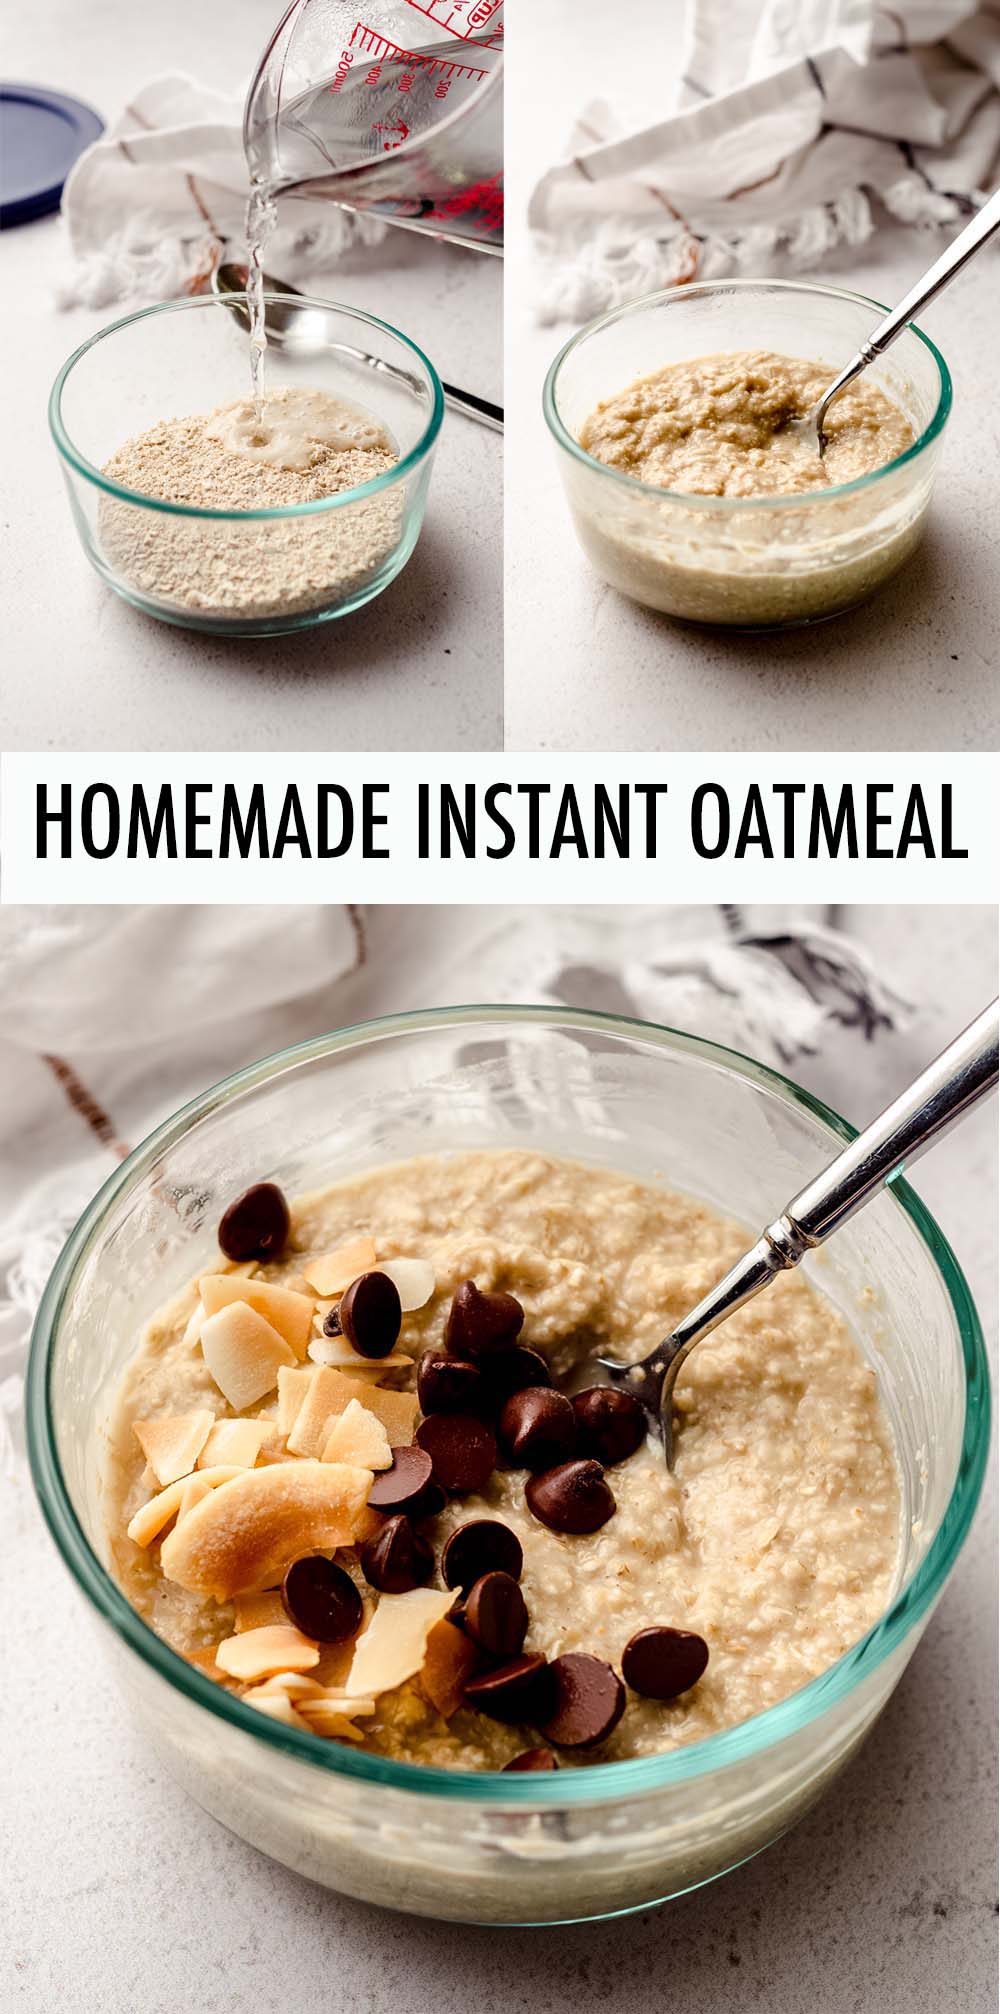 Make your own instant oatmeal packets so you always have oatmeal ready to go! Add your favorite toppings or bring them along so you always have a delicious bowl of oatmeal, even away from home. Perfect for packing in lunches or taking along for camping. via @frshaprilflours